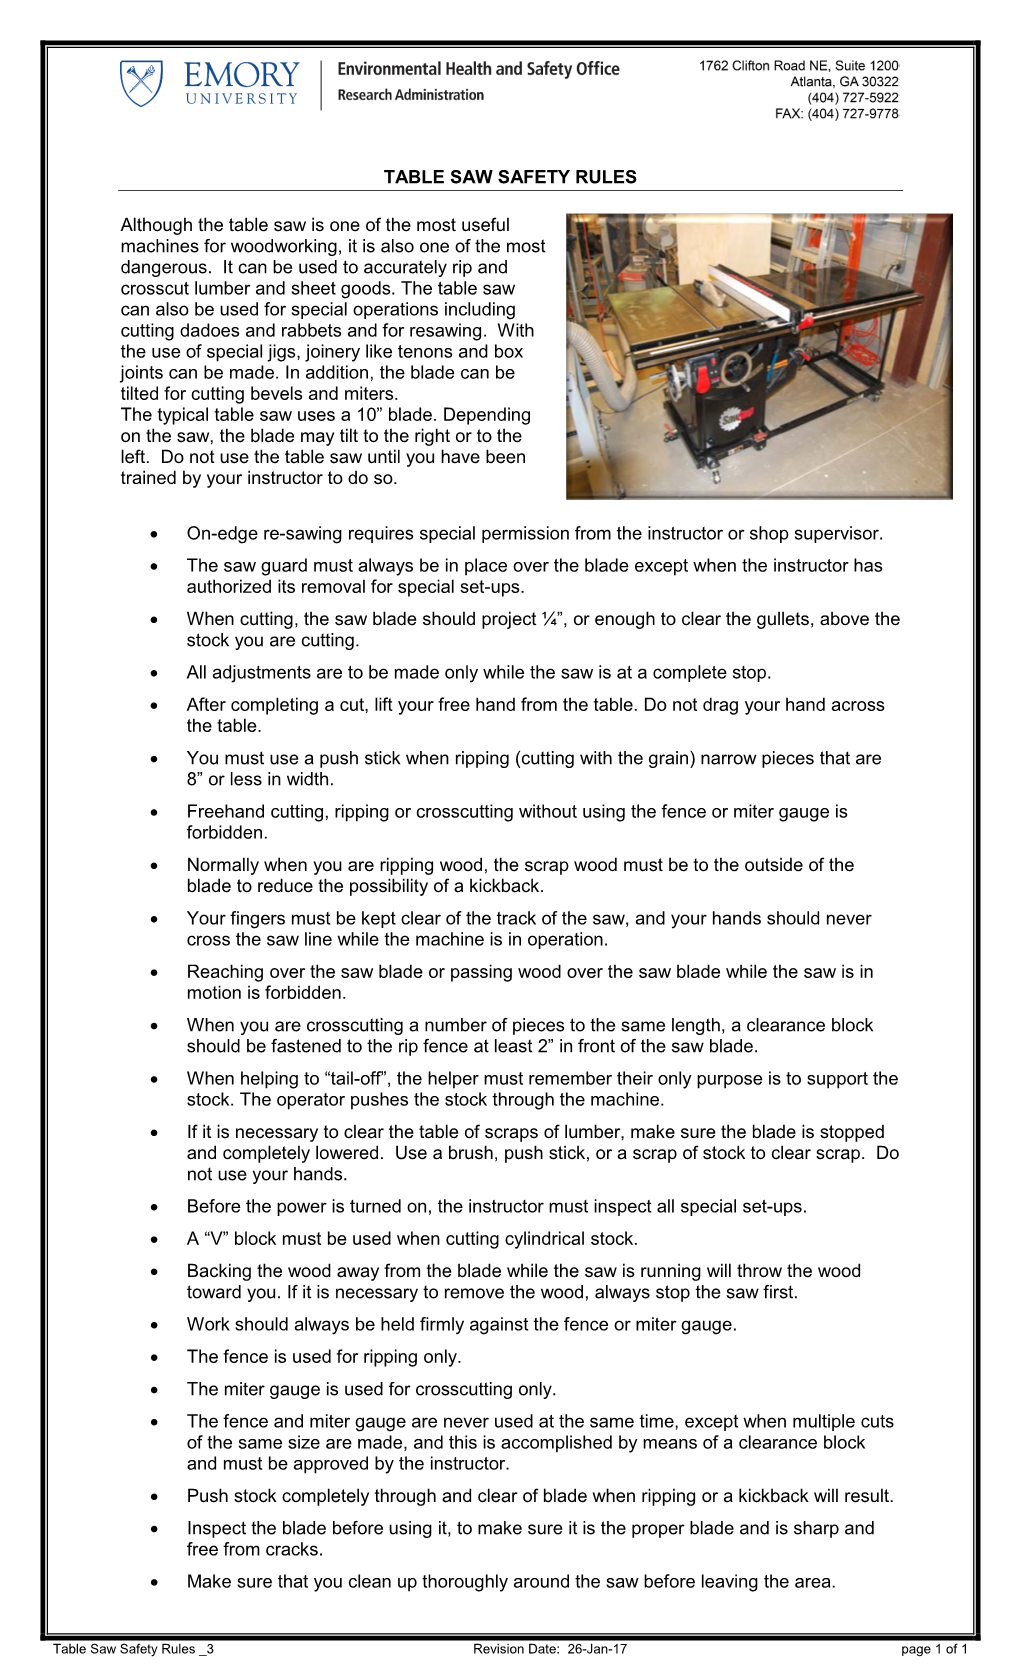 Table Saw Safety Rules